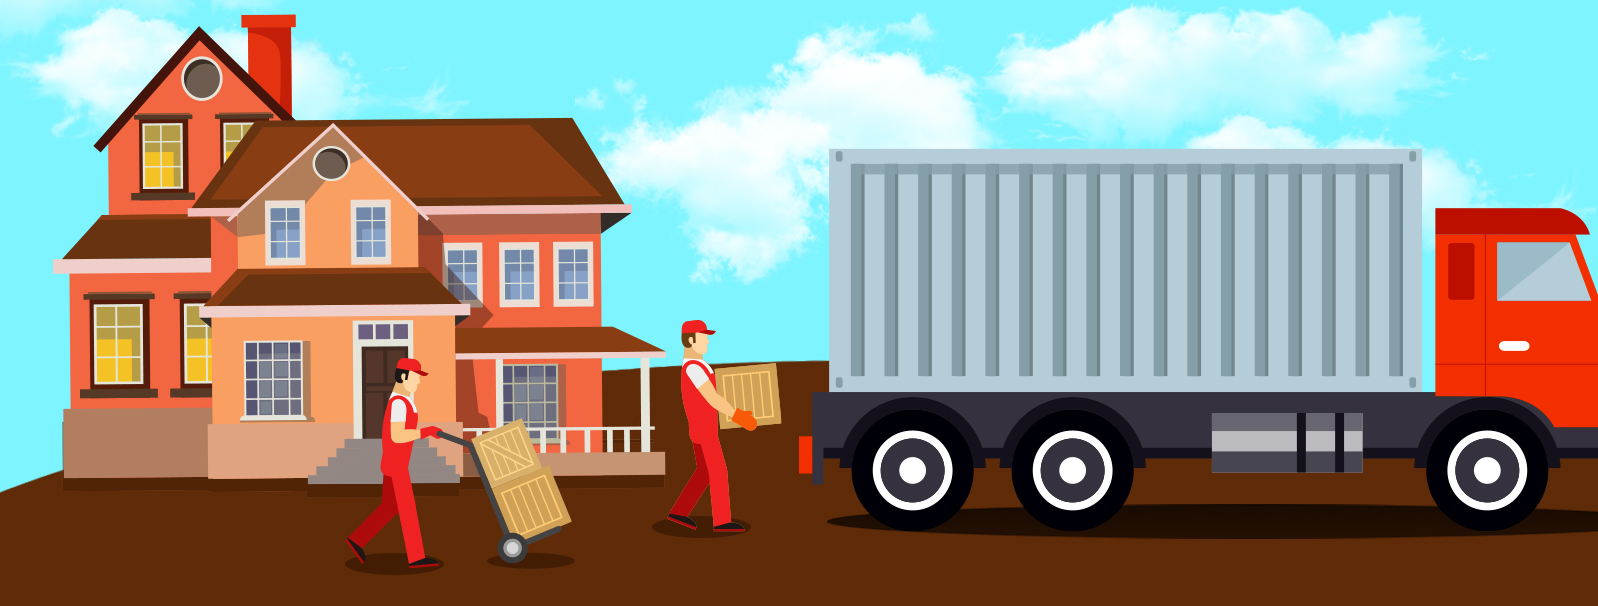 Packers and Movers in Fatehabad, Best Packers and Movers in Fatehabad, Trusted Packers and Movers in Fatehabad, Haryana